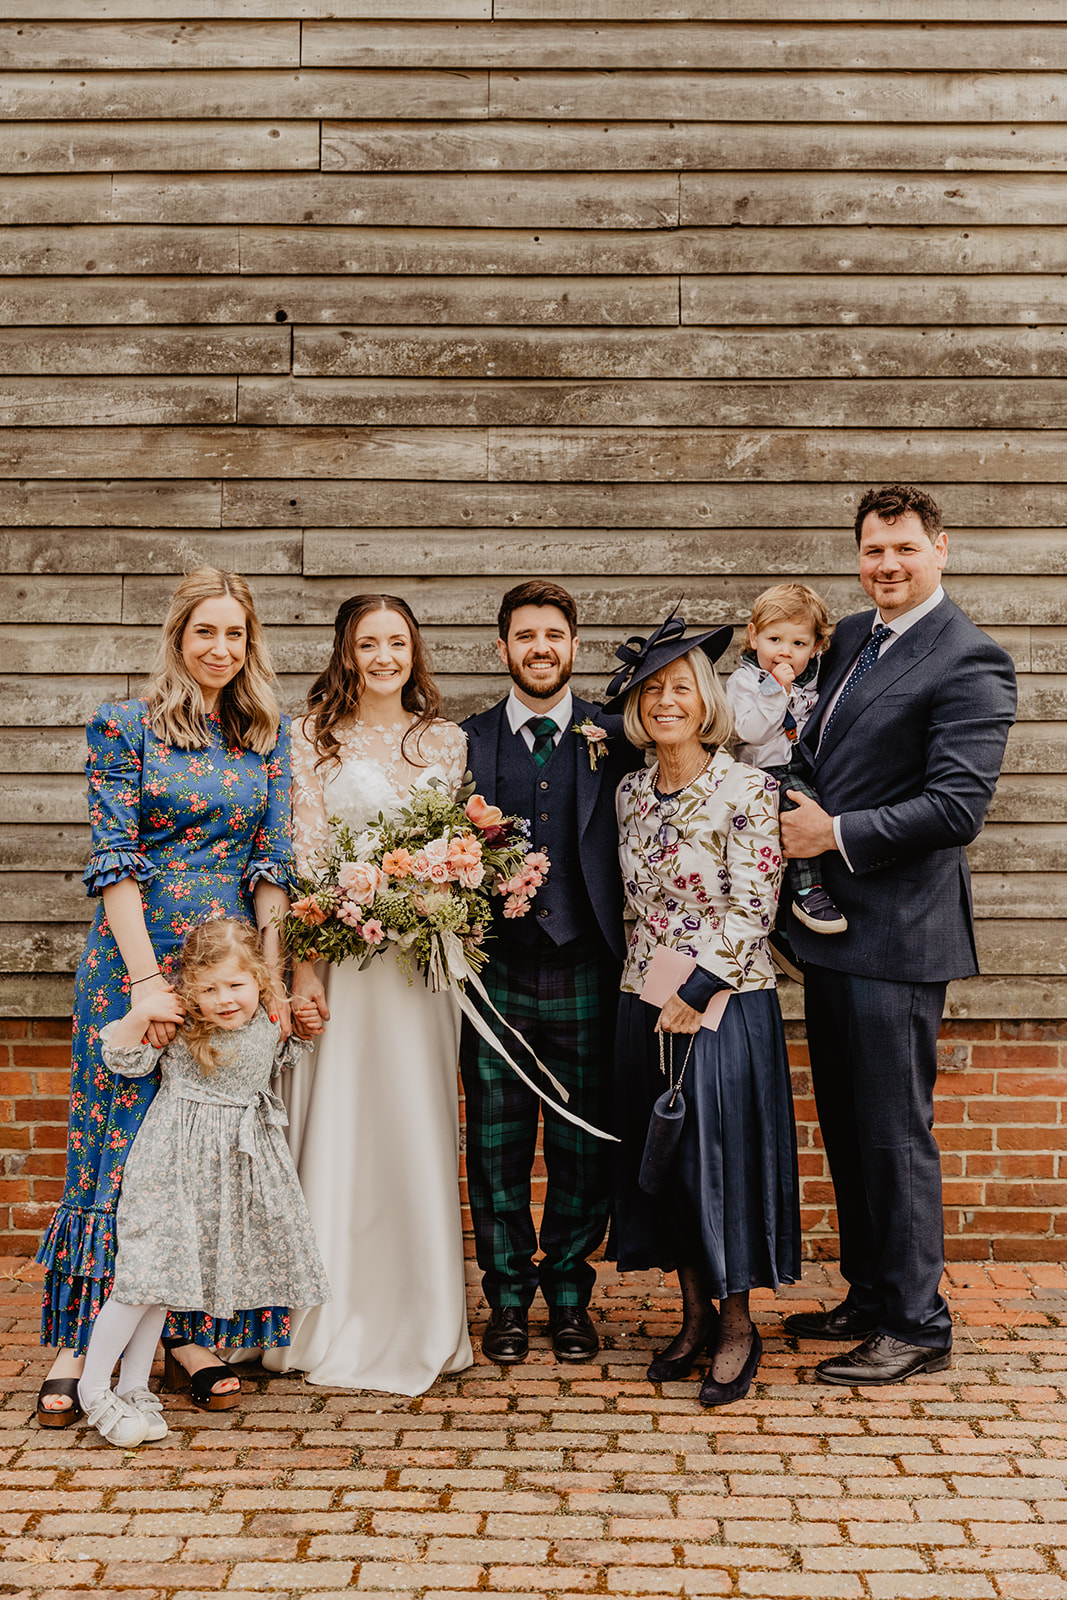 Bride and groom with guests at a Secret Barn Wedding, West Sussex. By Olive Joy Photography